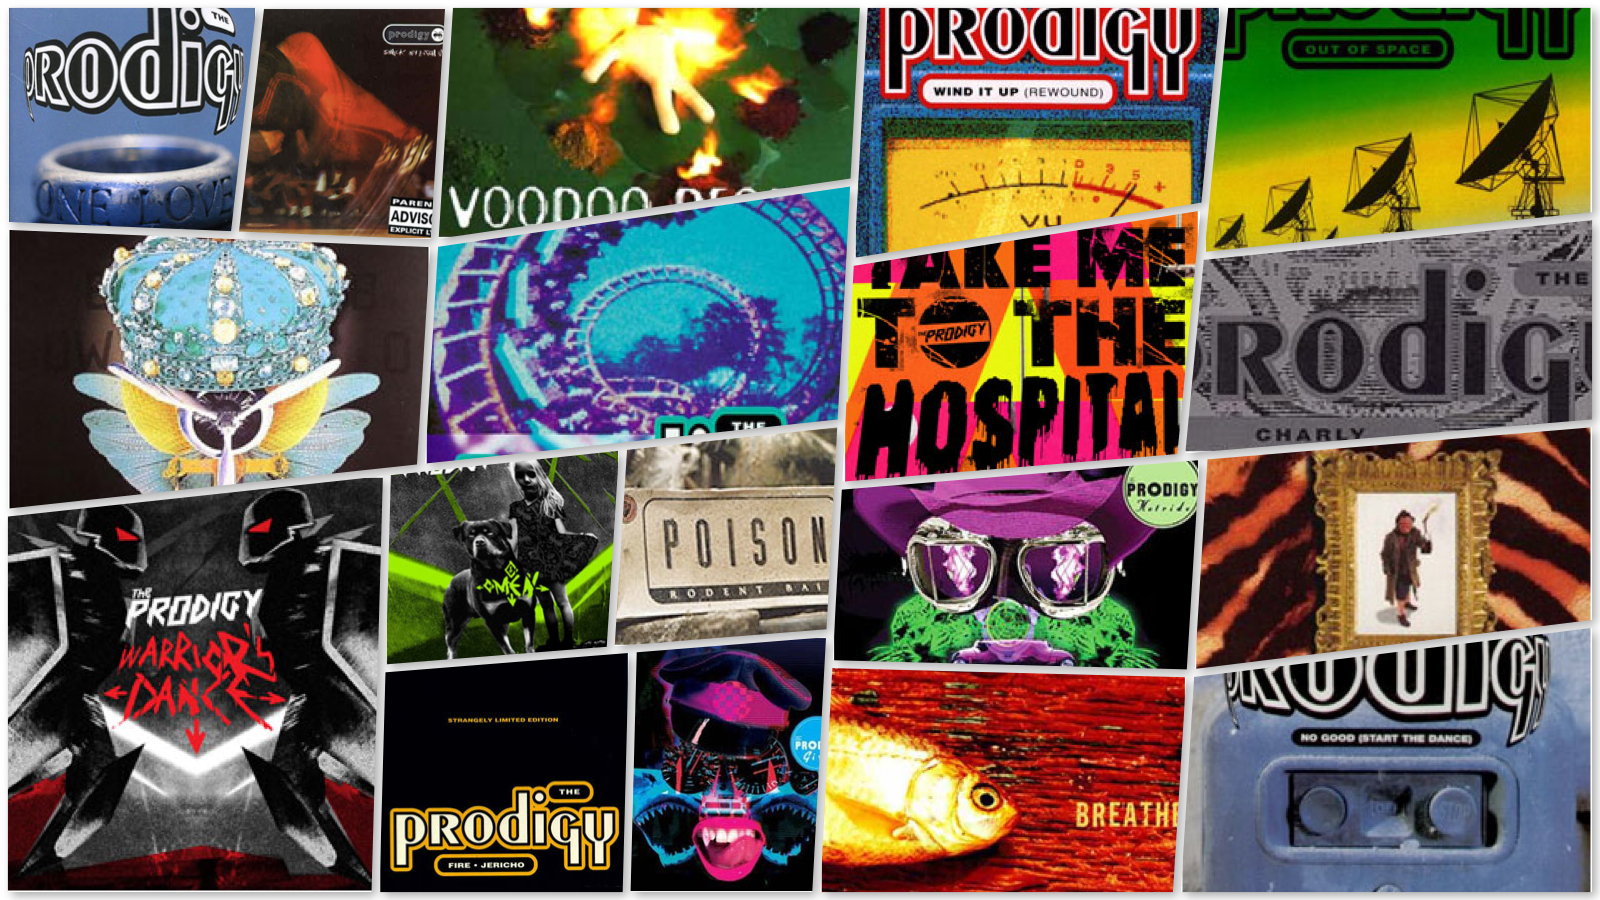 The Prodigy Fanboy Collage 005.